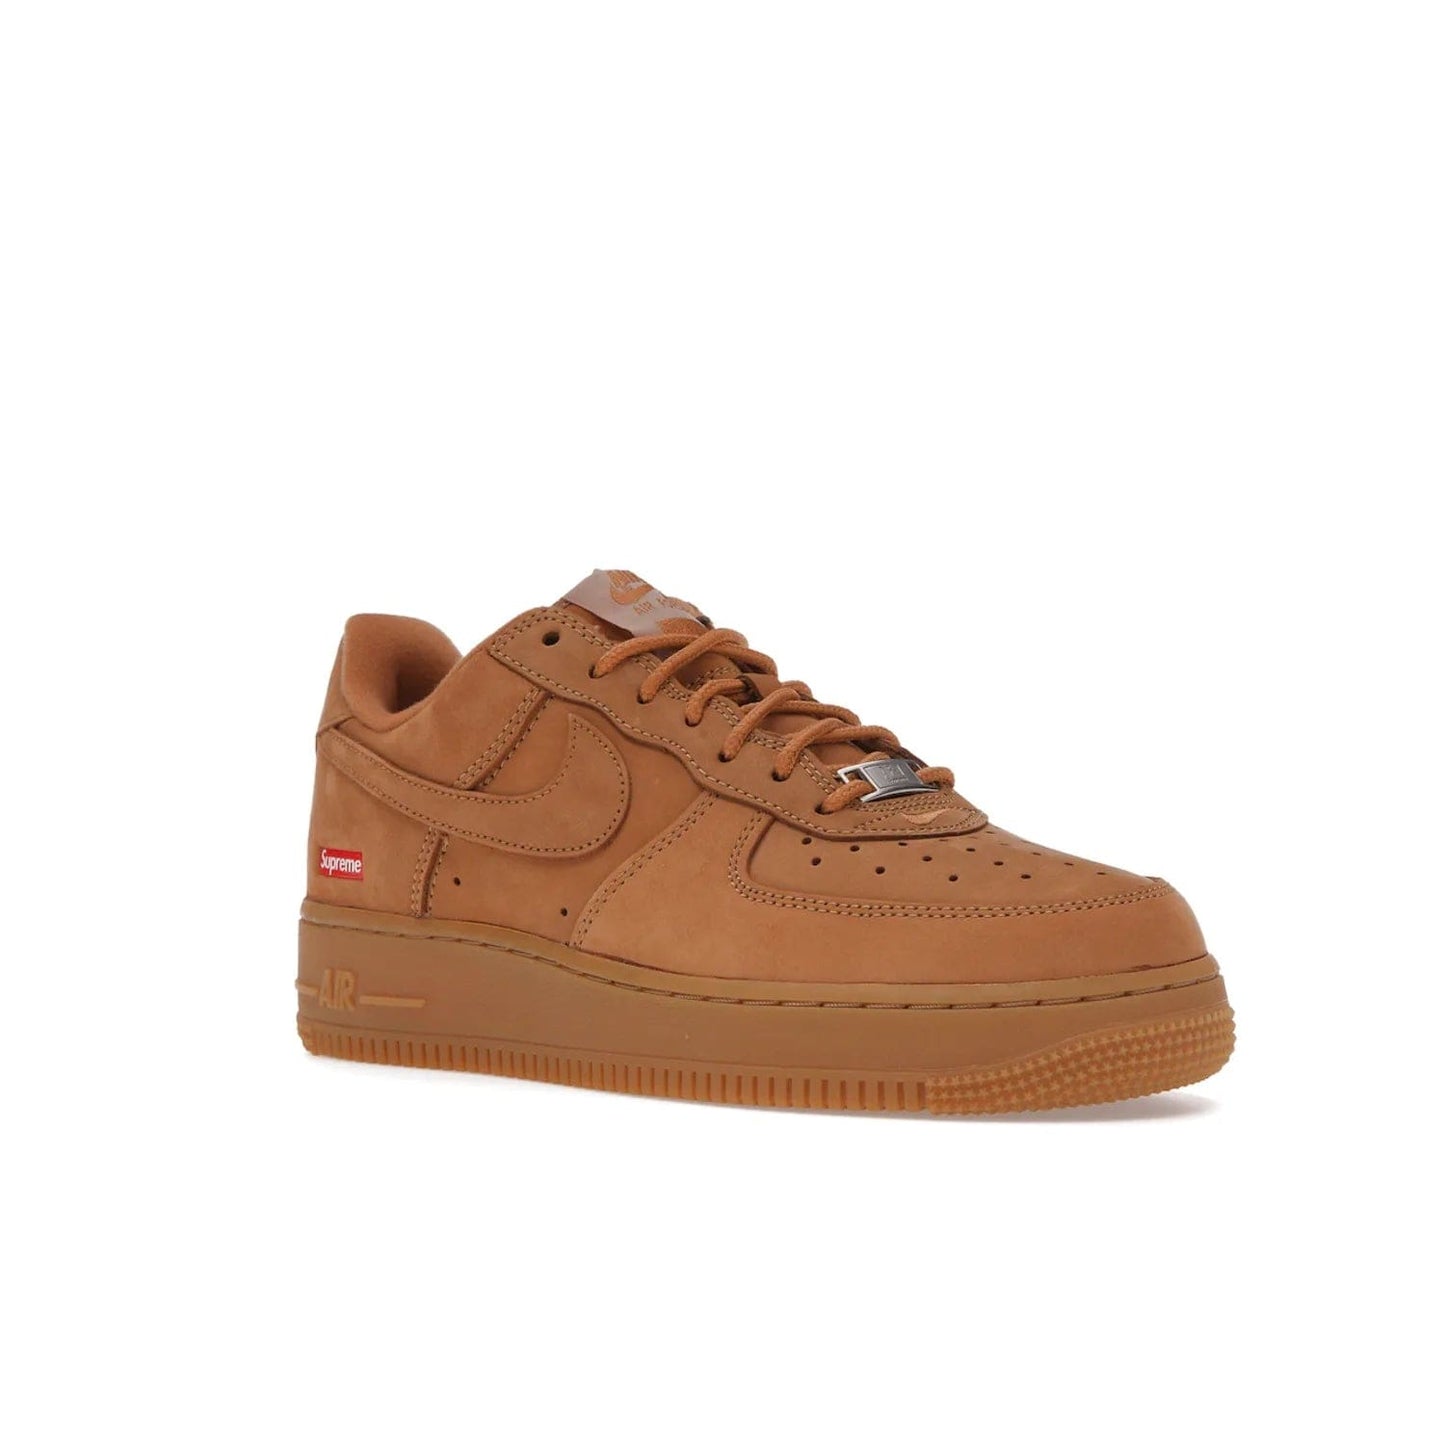 Nike Air Force 1 Low SP Supreme Wheat - Image 5 - Only at www.BallersClubKickz.com - A luxe Flax Durabuck upper and Supreme Box Logo insignias on the lateral heels make the Nike Air Force 1 Low SP Supreme Wheat a stylish lifestyle shoe. Matching Flax Air sole adds a classic touch to this collaboration between Nike and Supreme. Make a statement with this edition of the classic Air Force 1 Low.